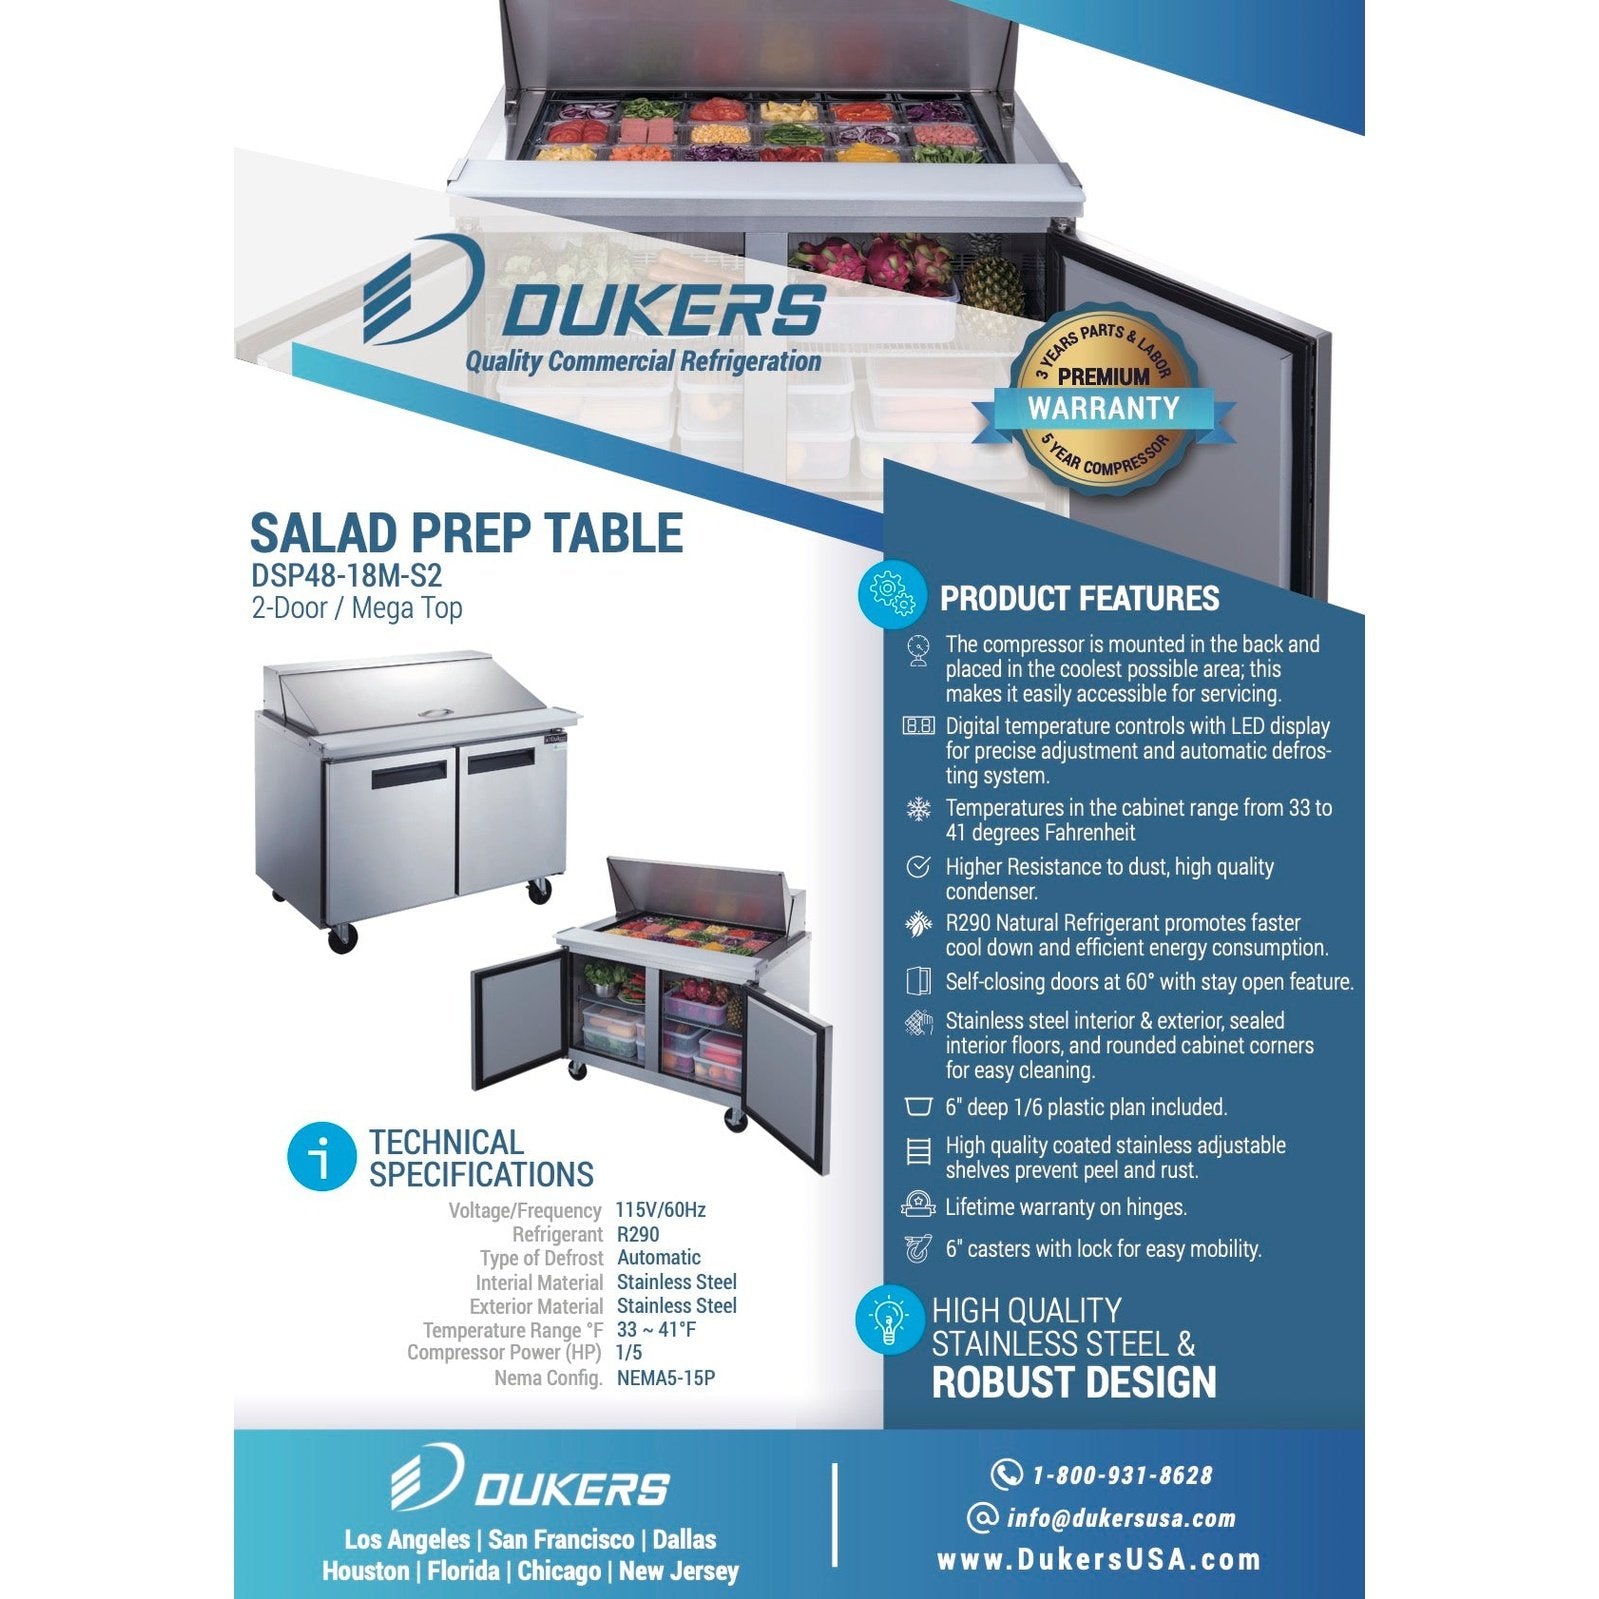 Dukers DSP48-18M-S2 2-Door Commercial Food Prep Table Refrigerator in Stainless Steel with Mega Top